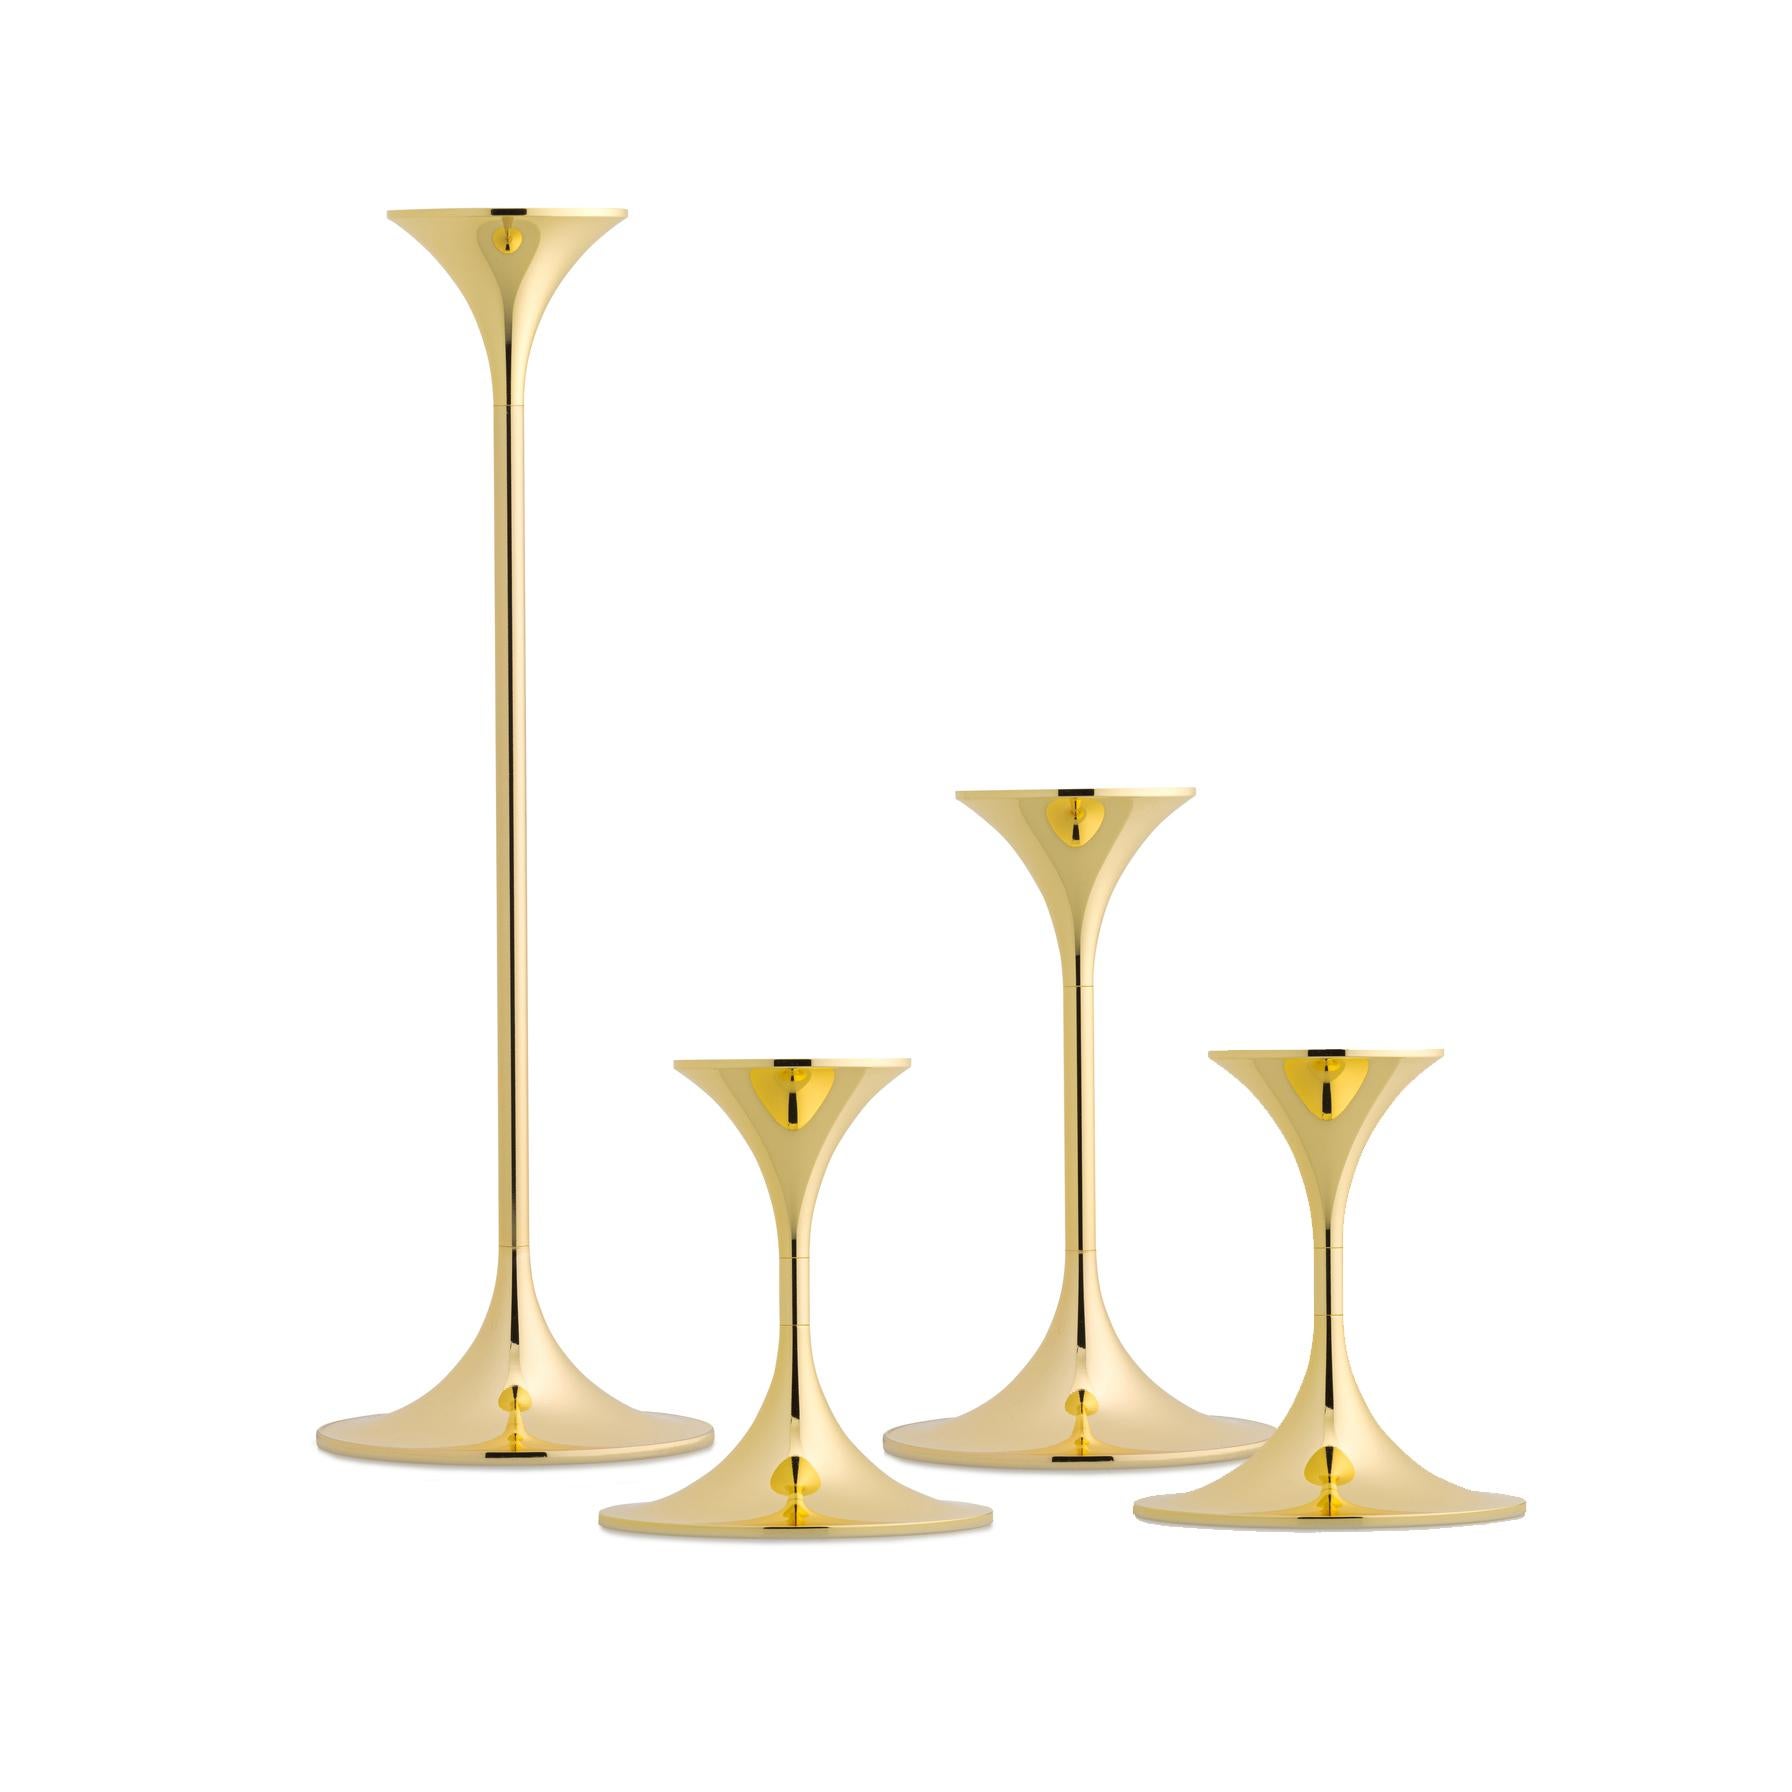 Contemporary Set of Four Max Brüel 'Jazz' Candleholders, Steel with Brass Plating by Karakter For Sale